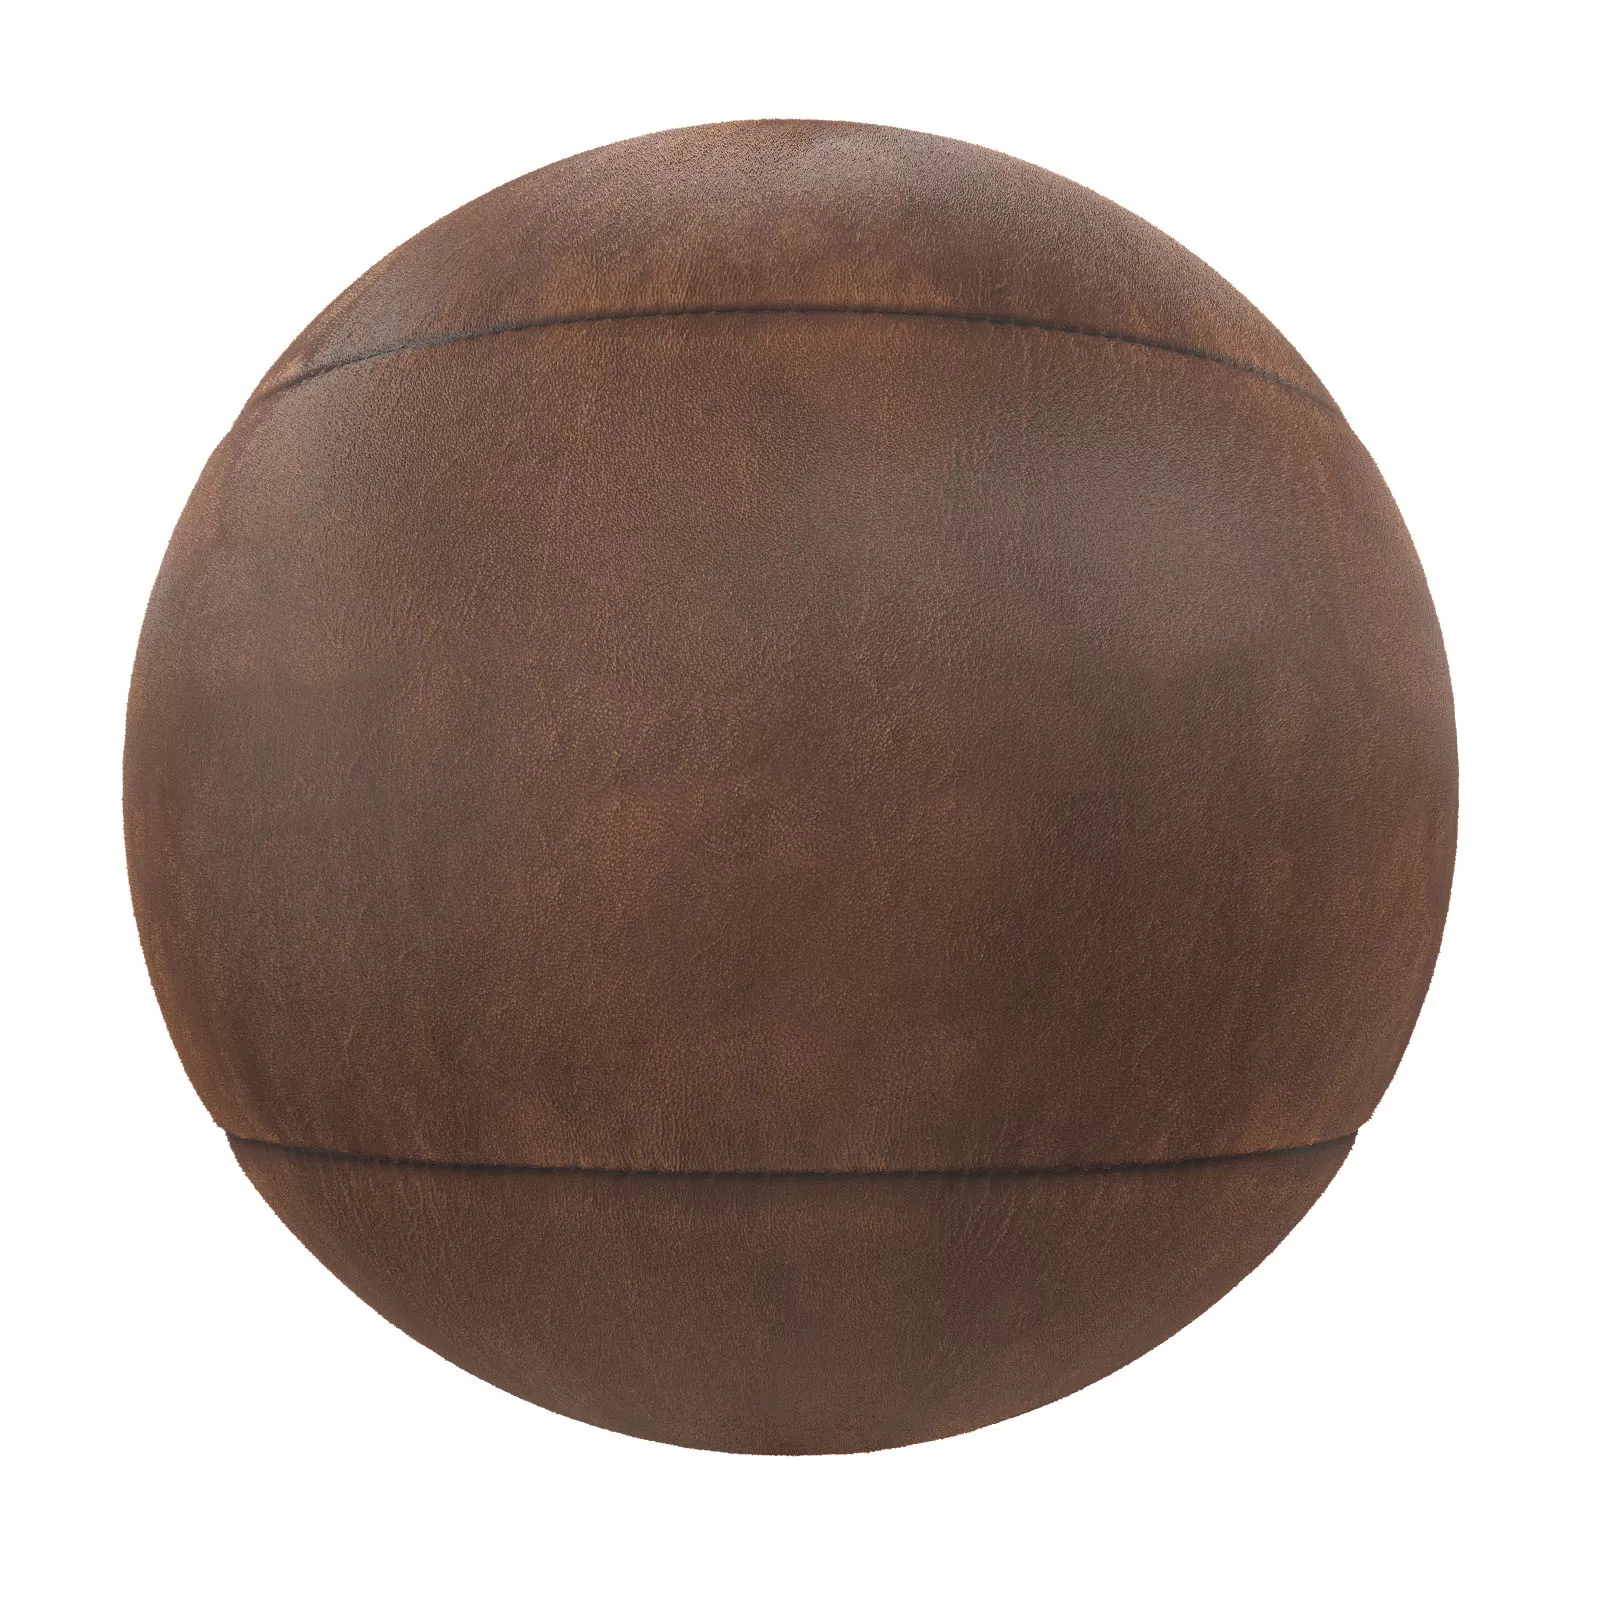 PBR CGAXIS TEXTURES – LEATHER – Stitched Brown Leather 4